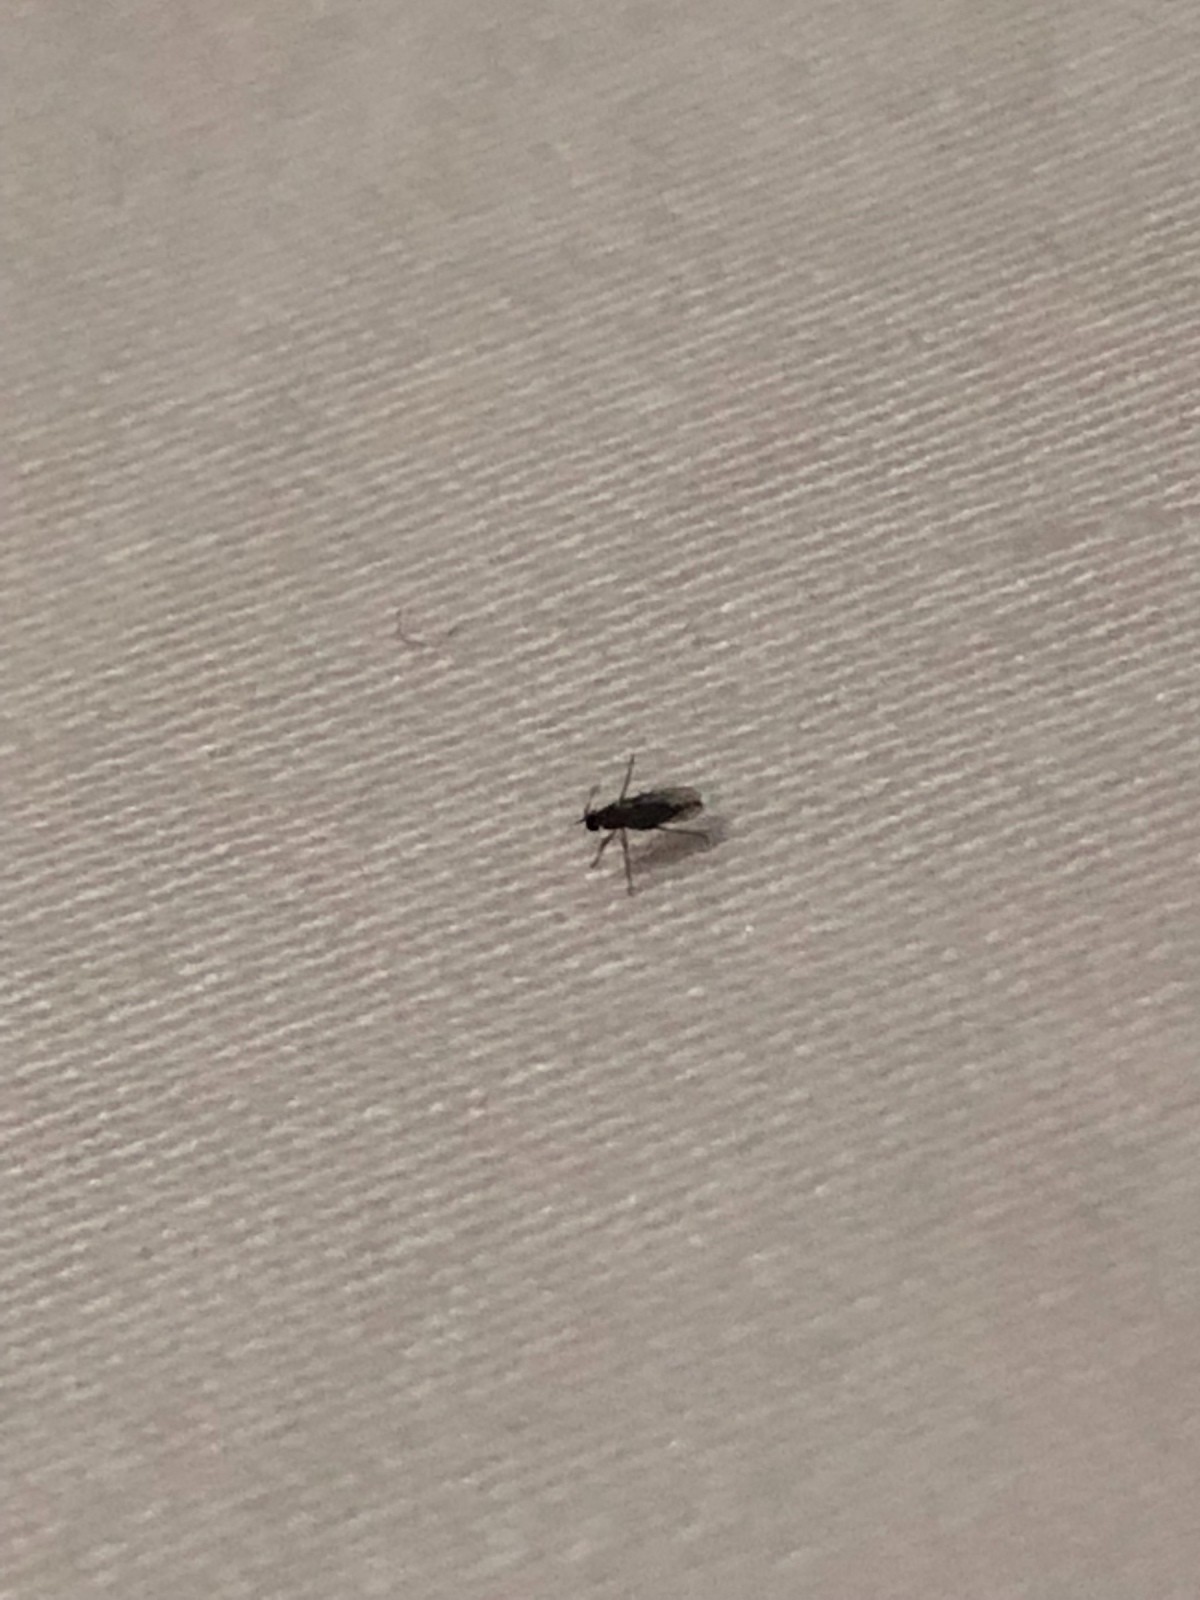 Identifying Tiny Flying Black Insects Tx2 